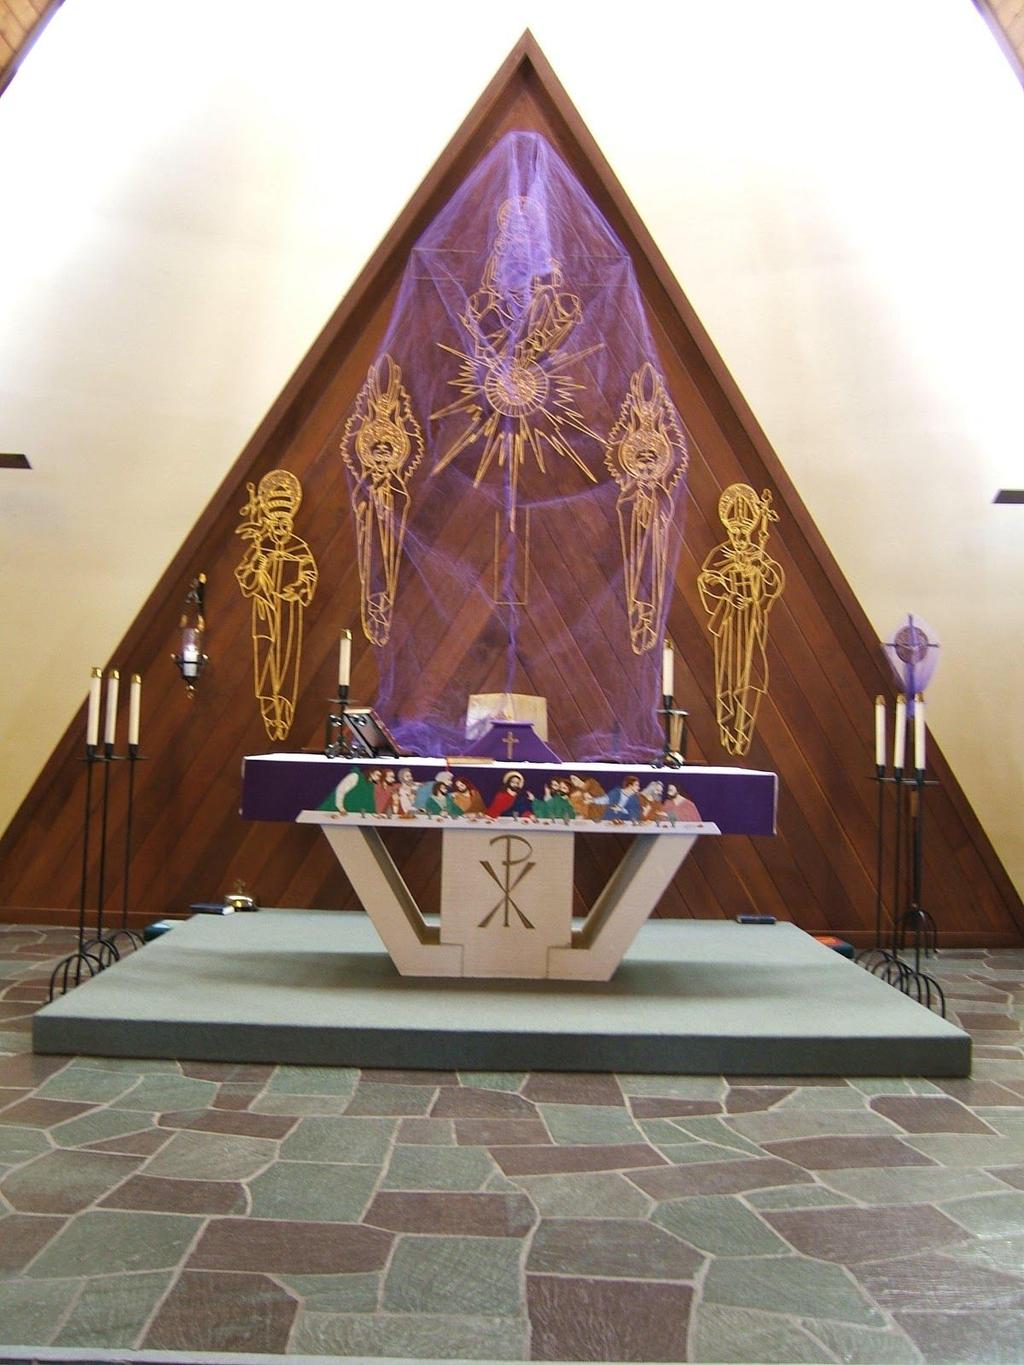 Then 3 Sundays will prepare for the time of fast and prayer, that, with hearts made penitent, we may keep a faithful LENT Check with rector about covering Reredos and processional crosses.